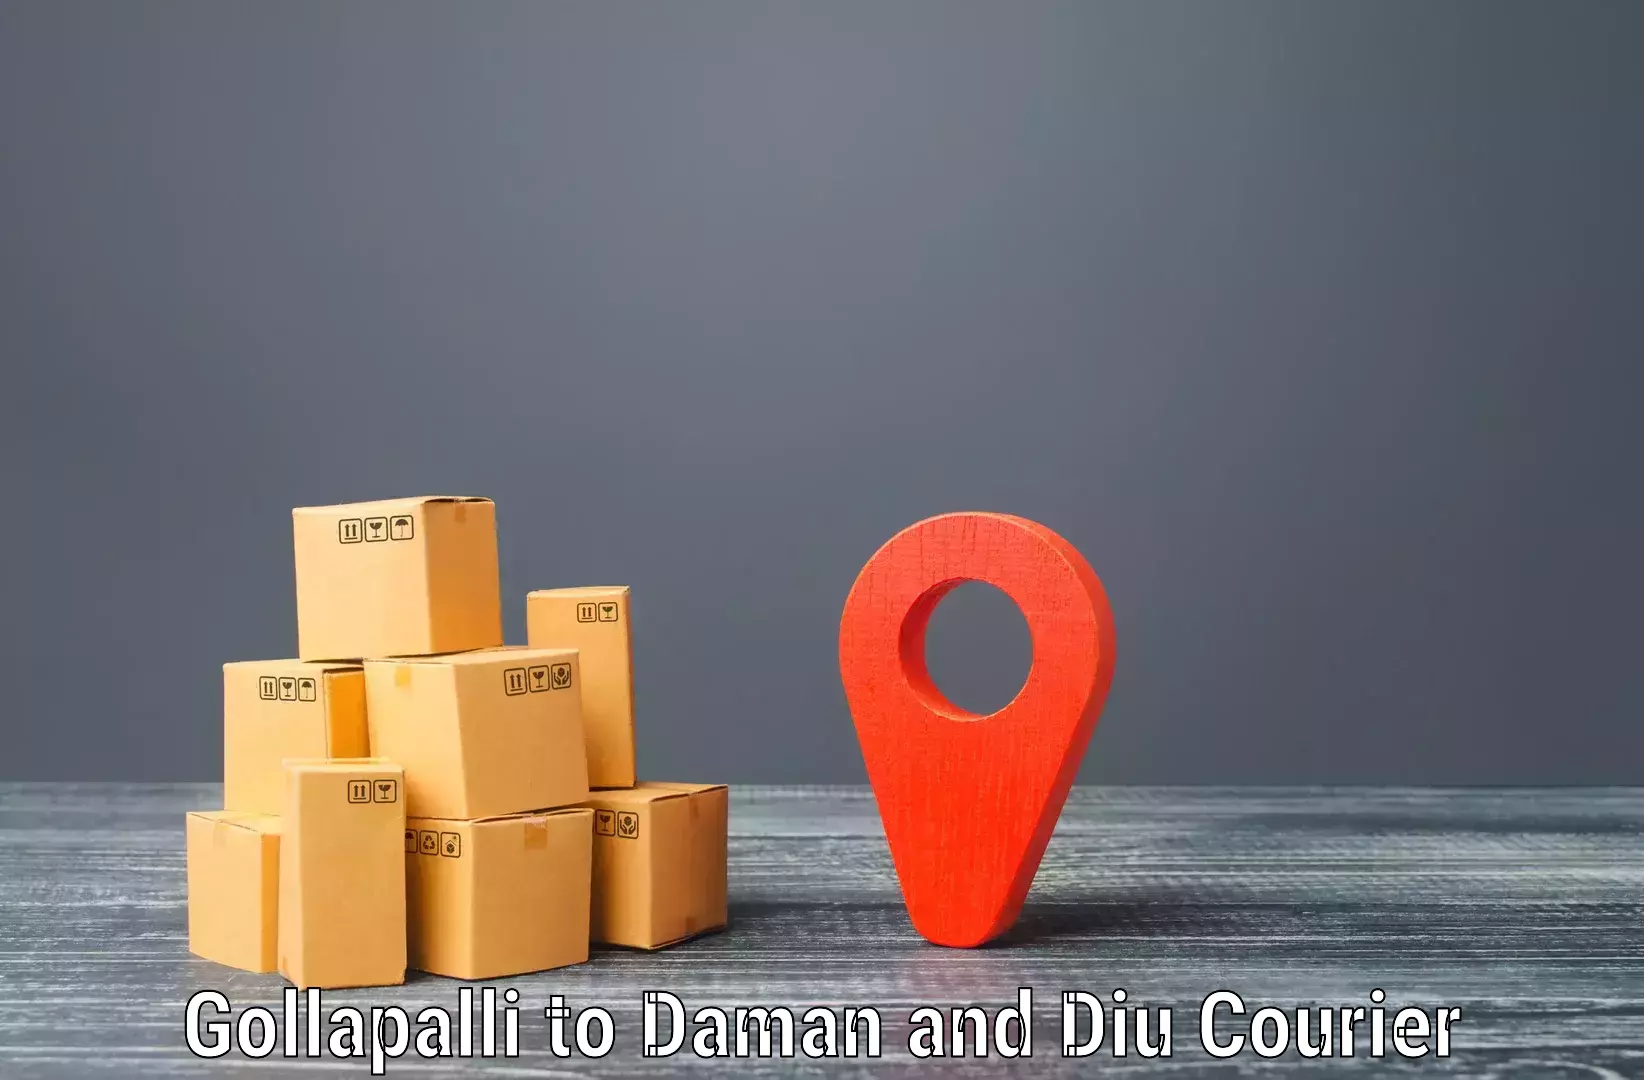 Secure freight services Gollapalli to Diu